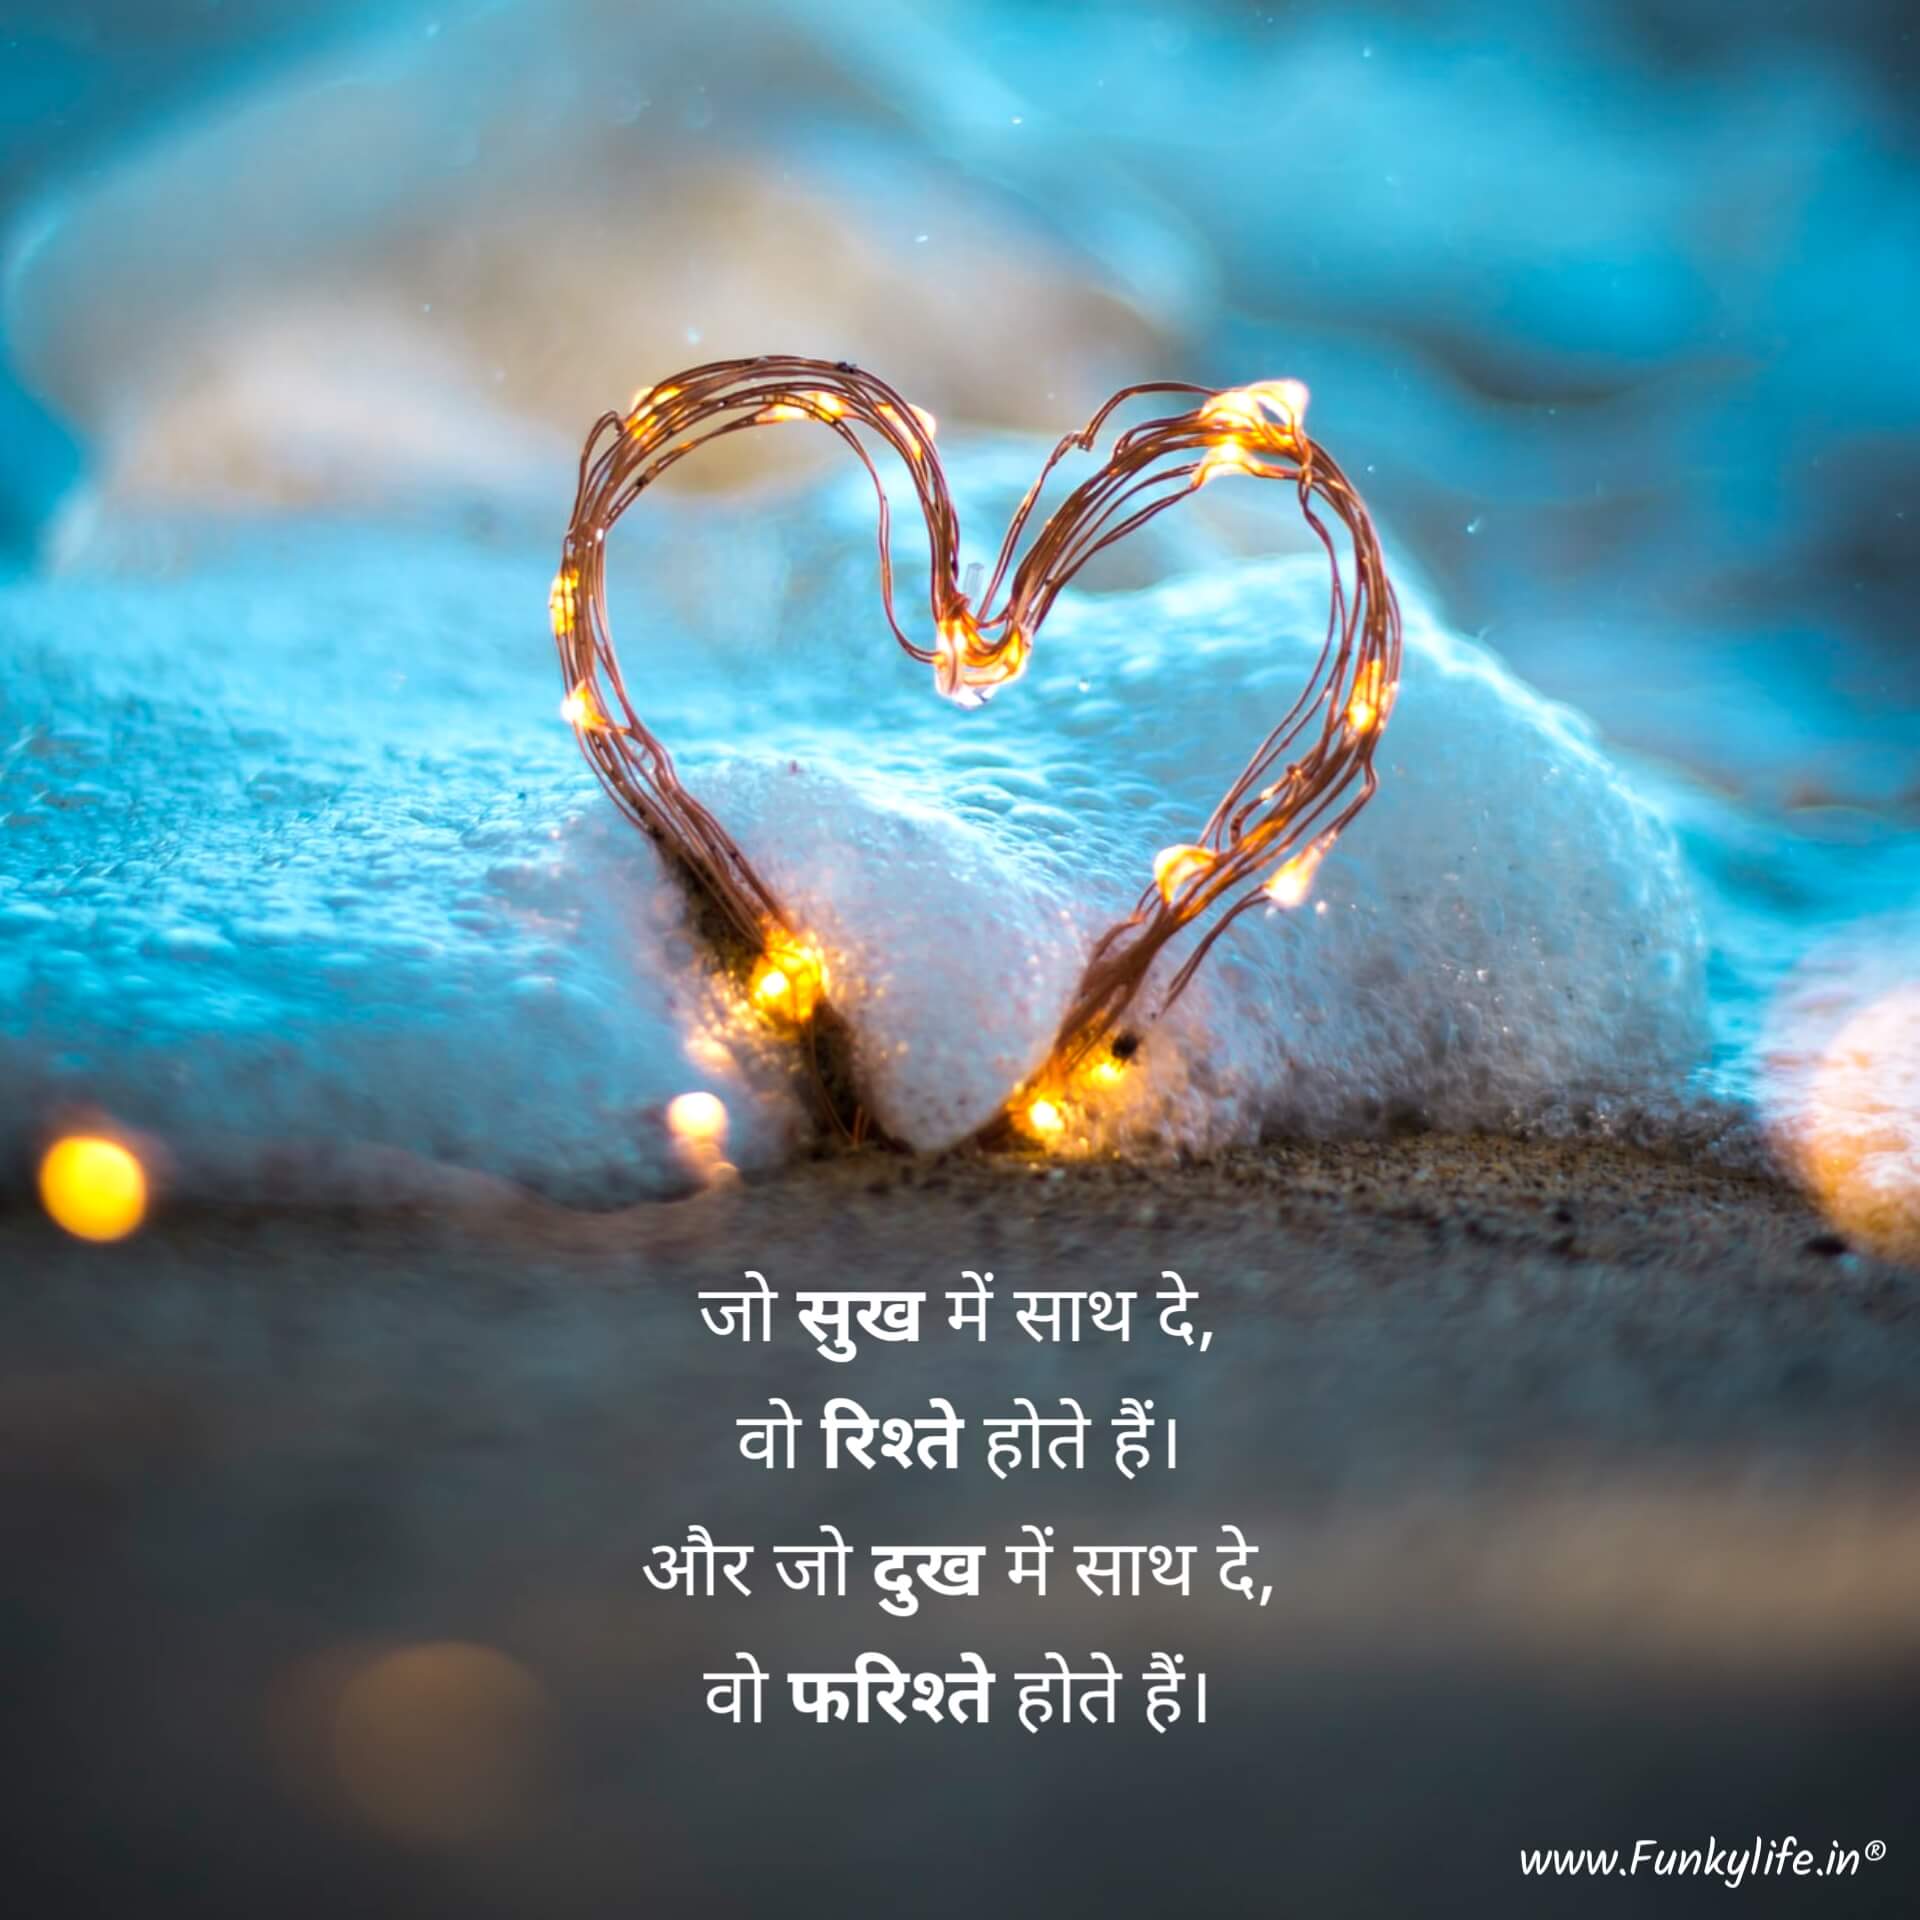 Golden Life Quotes in Hindi